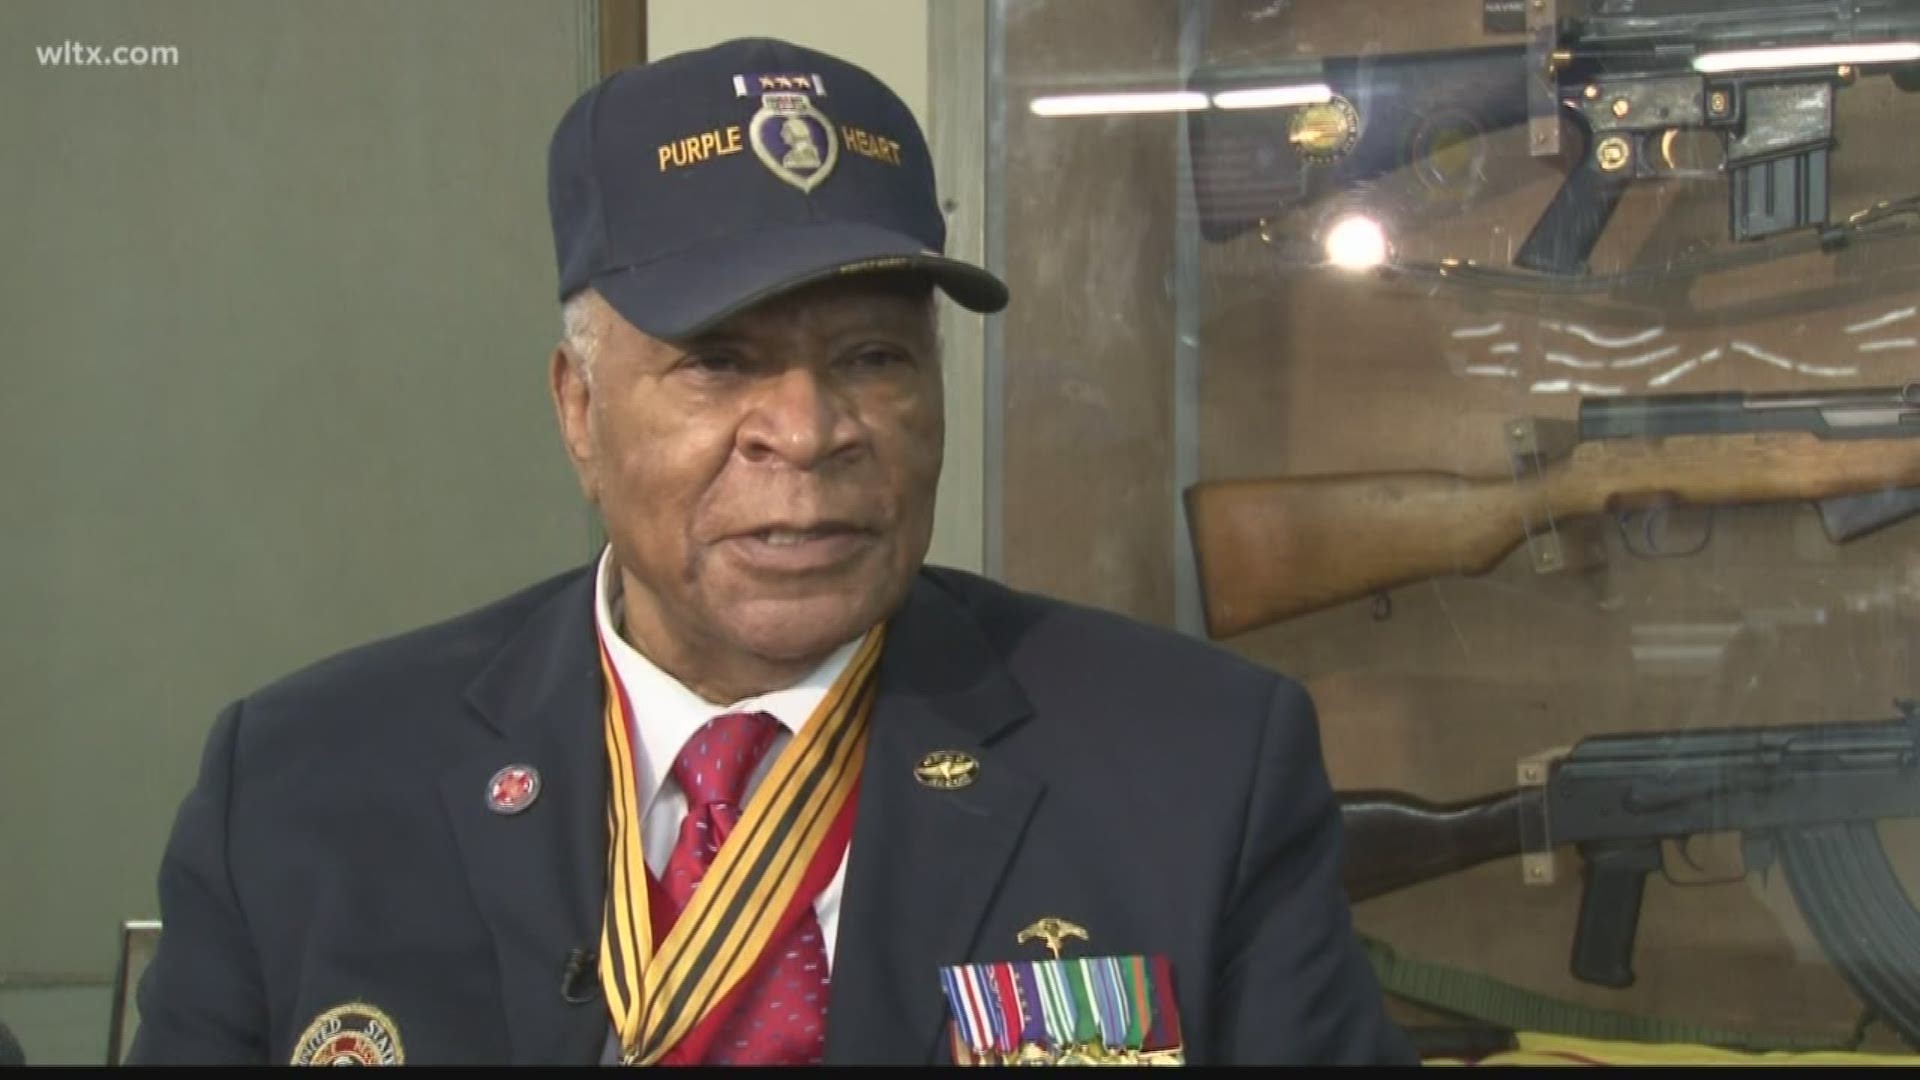 Major James Capers Jr. left Bishopville in the early 1950s. And on Monday, a ceremony was held in the town in honor of his service and dedication to the Country.